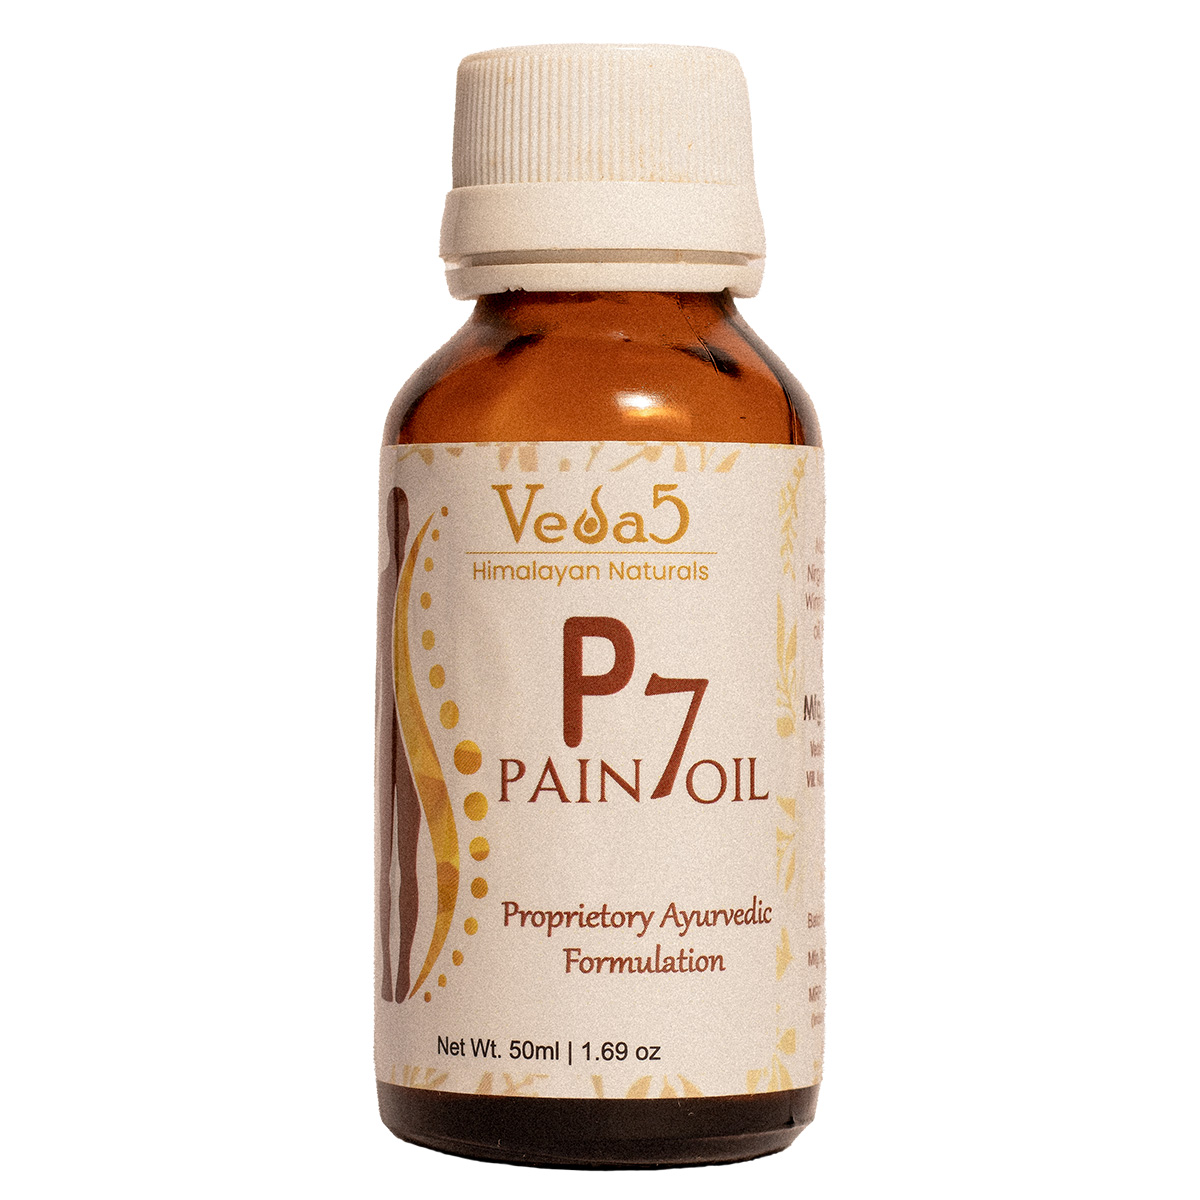 P7 Oil by Veda5 Himalayan Naturals 1